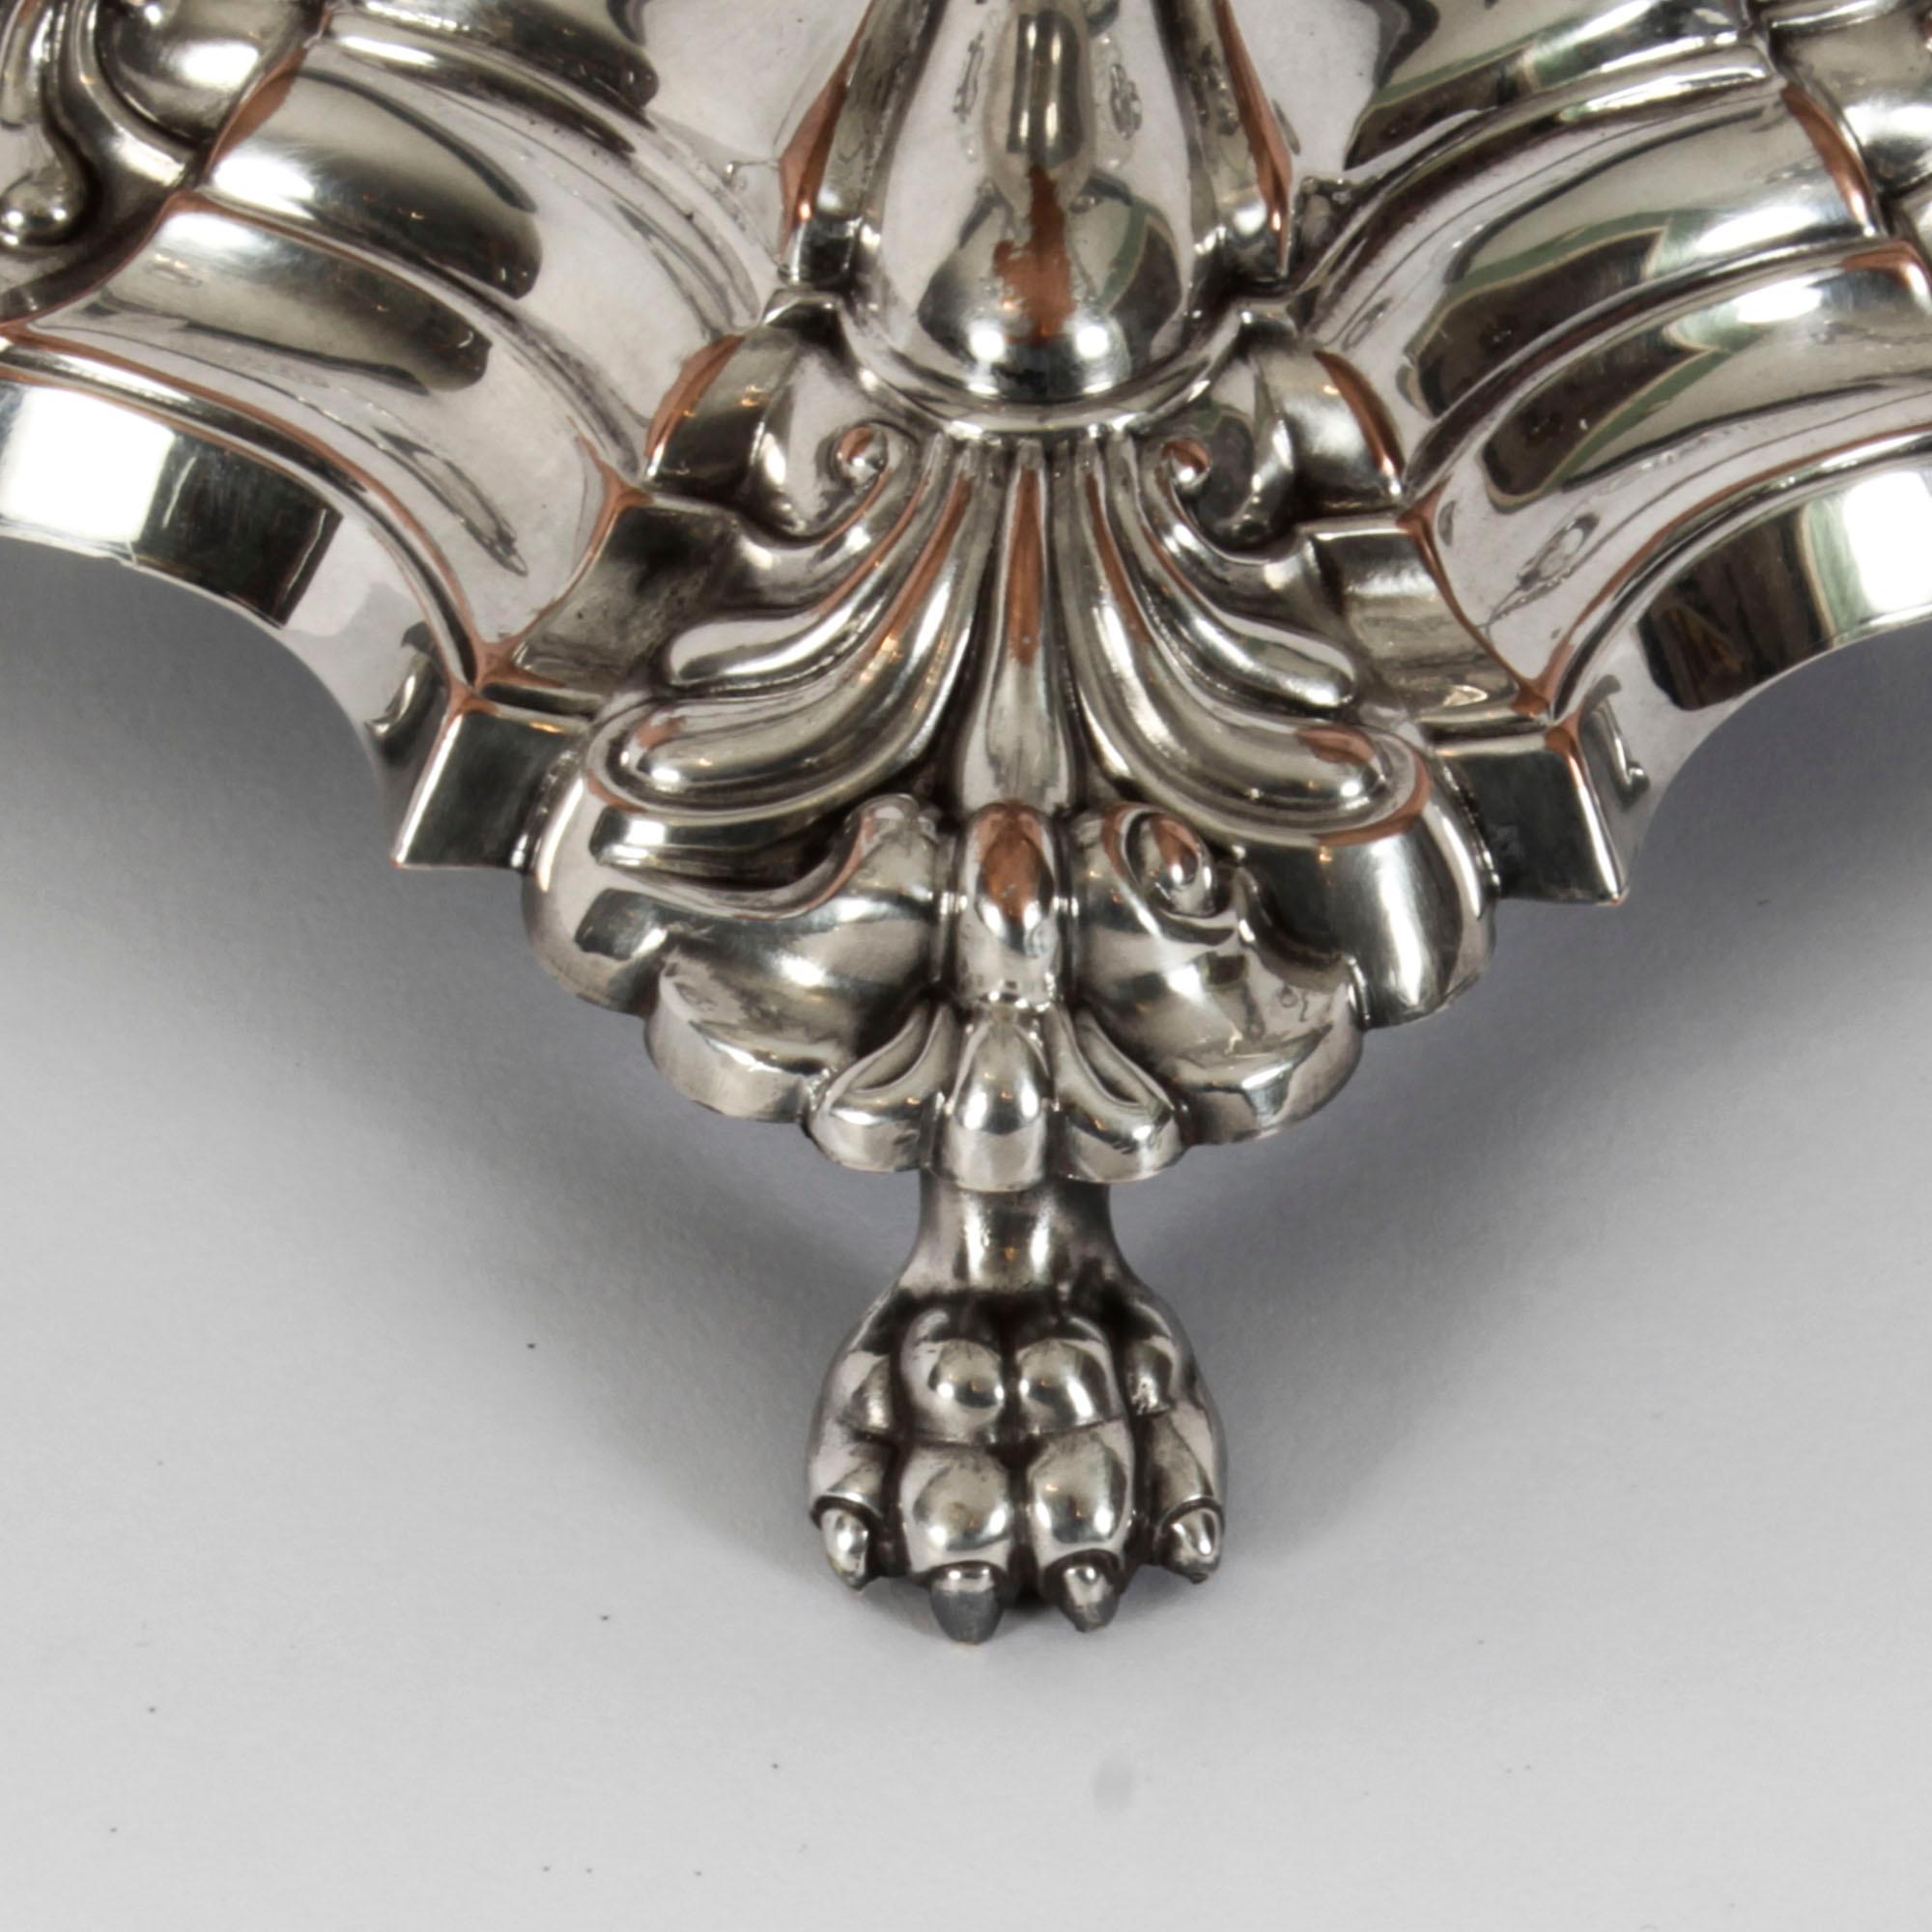 Mid-19th Century Antique English Silver Plate Cut Glass Epergne Candelabra Centrepiece 19th C